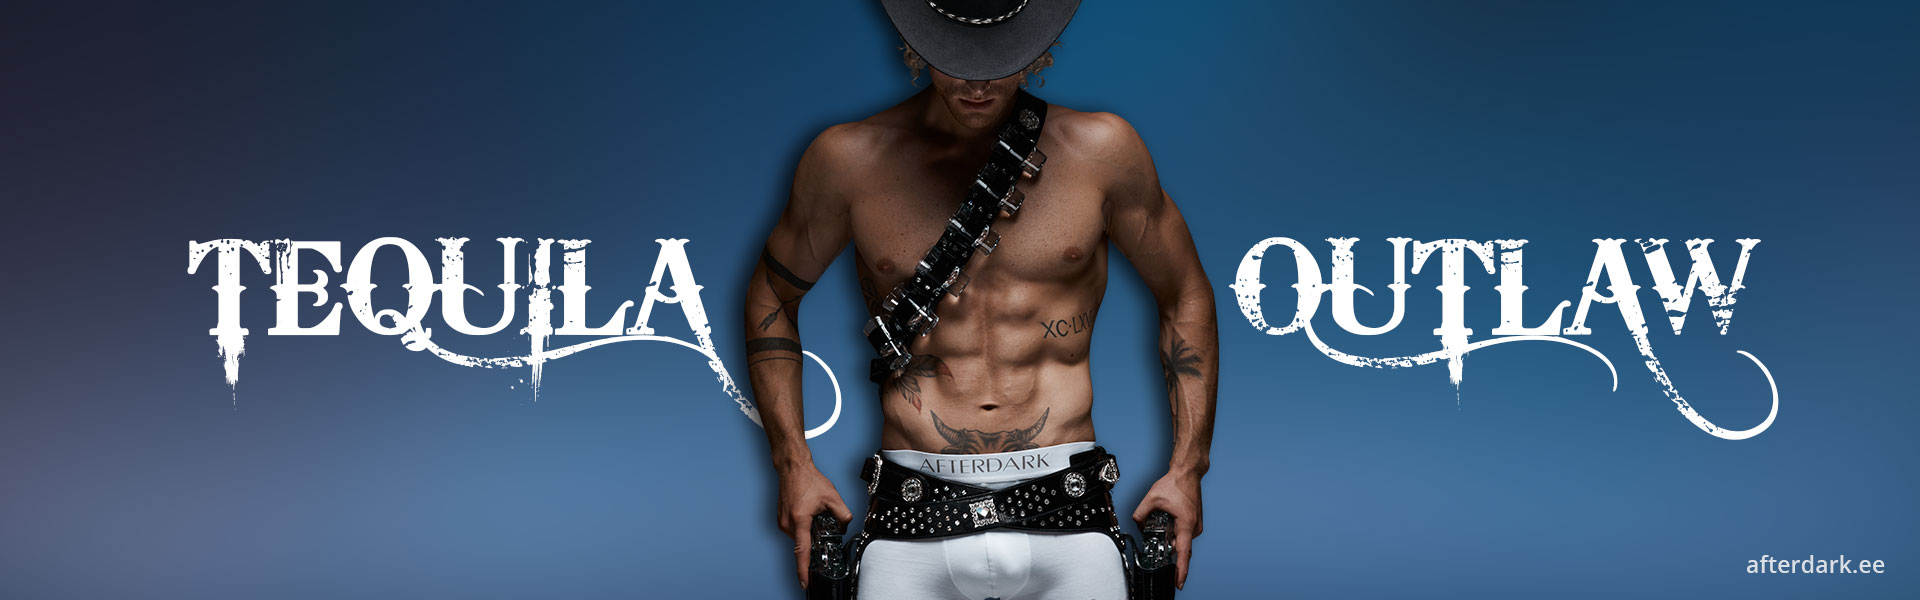 Tequila Outlaw | Male Stripper Shot & Show